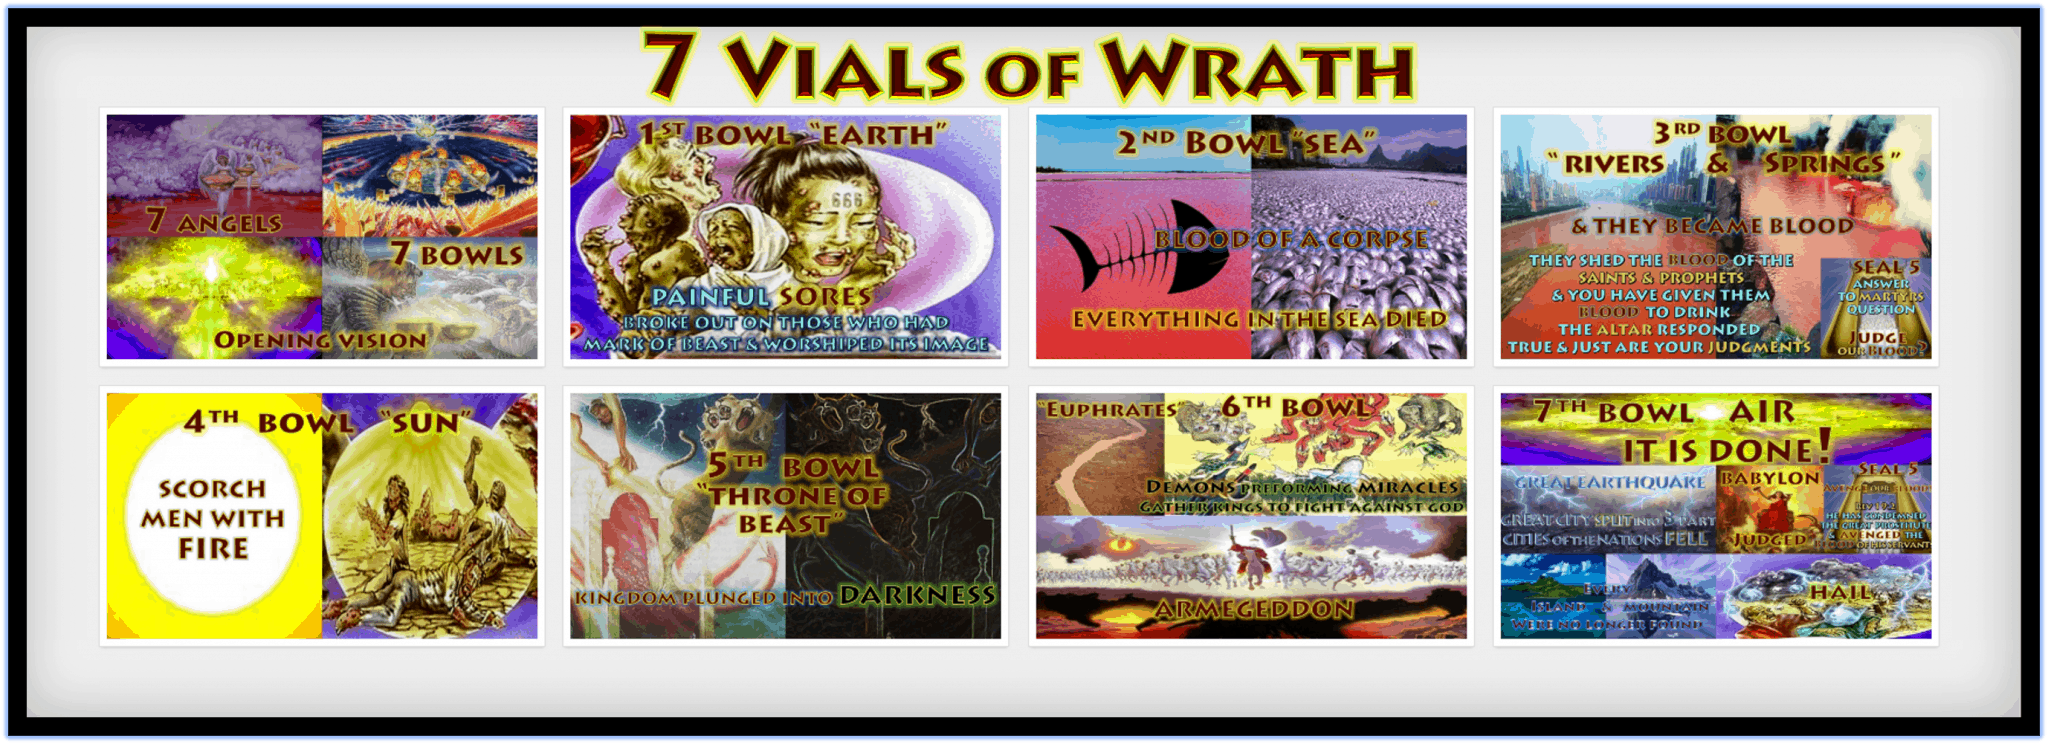 7 Seals,Book of Revelation,Seven Seals,First Seal,Second Seal,Third Seal,Fourth Seal,Fifth Seal,Sixth Seal,Seventh Seal,Chapter 4,Chapter 5,Chapter 6,Chapter 7,7 Trumpets,Seven Trumpets,First Trumpet,Second Trumpet,Third Trumpet,Fourth Trumpet,Fifth Trumpet,Sixth Trumpet,Seventh Trumpet,Book of Revelation,Picture Gallery,Album,Chapter 8,Chapter 9,Chapter 10,Chapter 11,Seven Vials of Wrath,7 Vials,7 Bowls,Seven Bowls,wrath,Picture Gallery,Book of Revelation,First Vial,Second Vial,Third Vial,Fourth Vial,Fifth Vial,Sixth Vial,Seventh Vial,Chapter 15,Chapter 16,Chapter 19,Armageddon,7 Bowls of Wrath,First Bowl,Second Bowl,Third Bowl,Fourth Bowl,Fifth Bowl,Sixth Bowl,Seventh Bowl